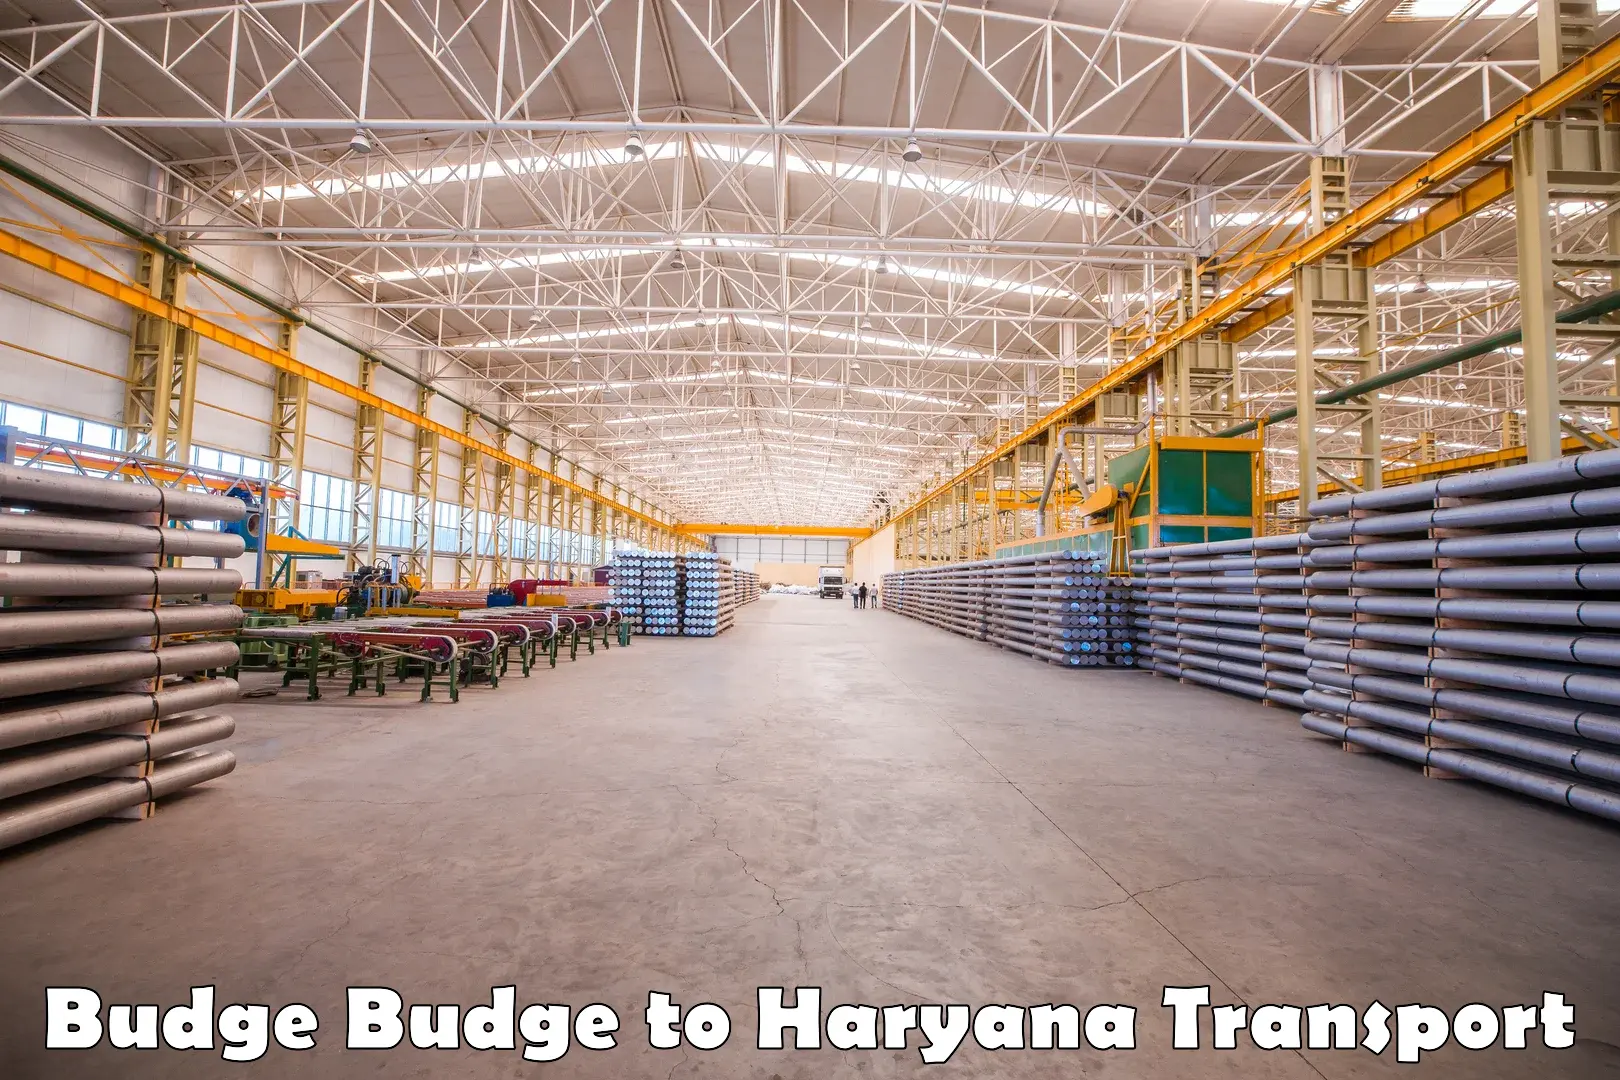 Transport bike from one state to another Budge Budge to Haryana